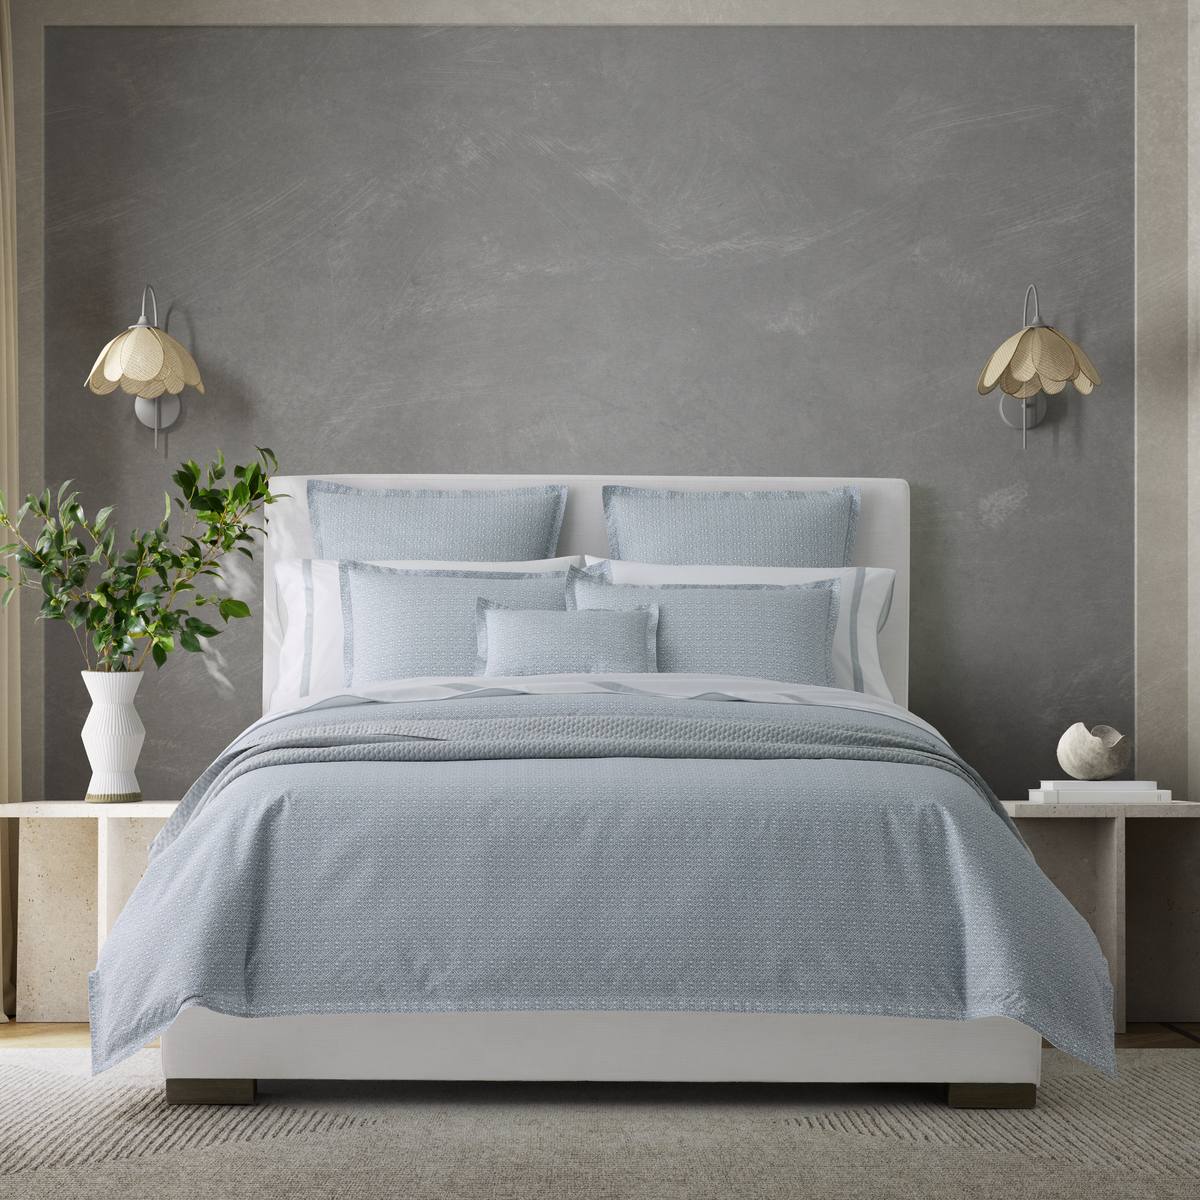 Full Bed Dressed in Matouk Schumacher Catarina Bedding in Hazy Blue Color